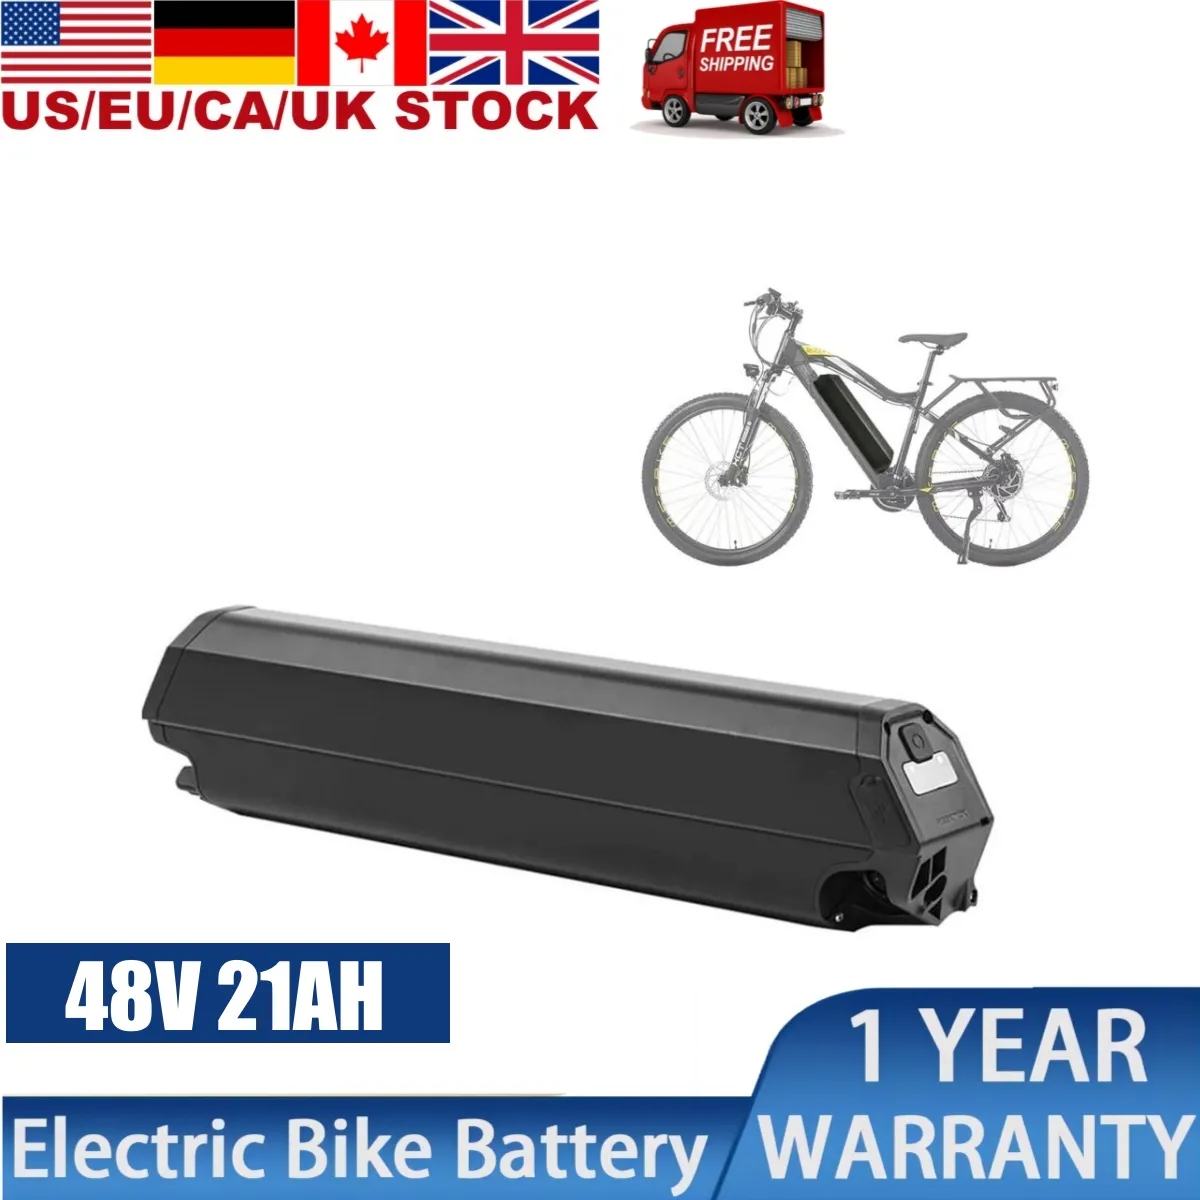 Dorado Max E Bike Battery 48V 21Ah Integrated Tube 48 Volt Lithium Battery  For 1000W 500W Electric Bikes Moscow Approved From Tiktok_vape, $327.99